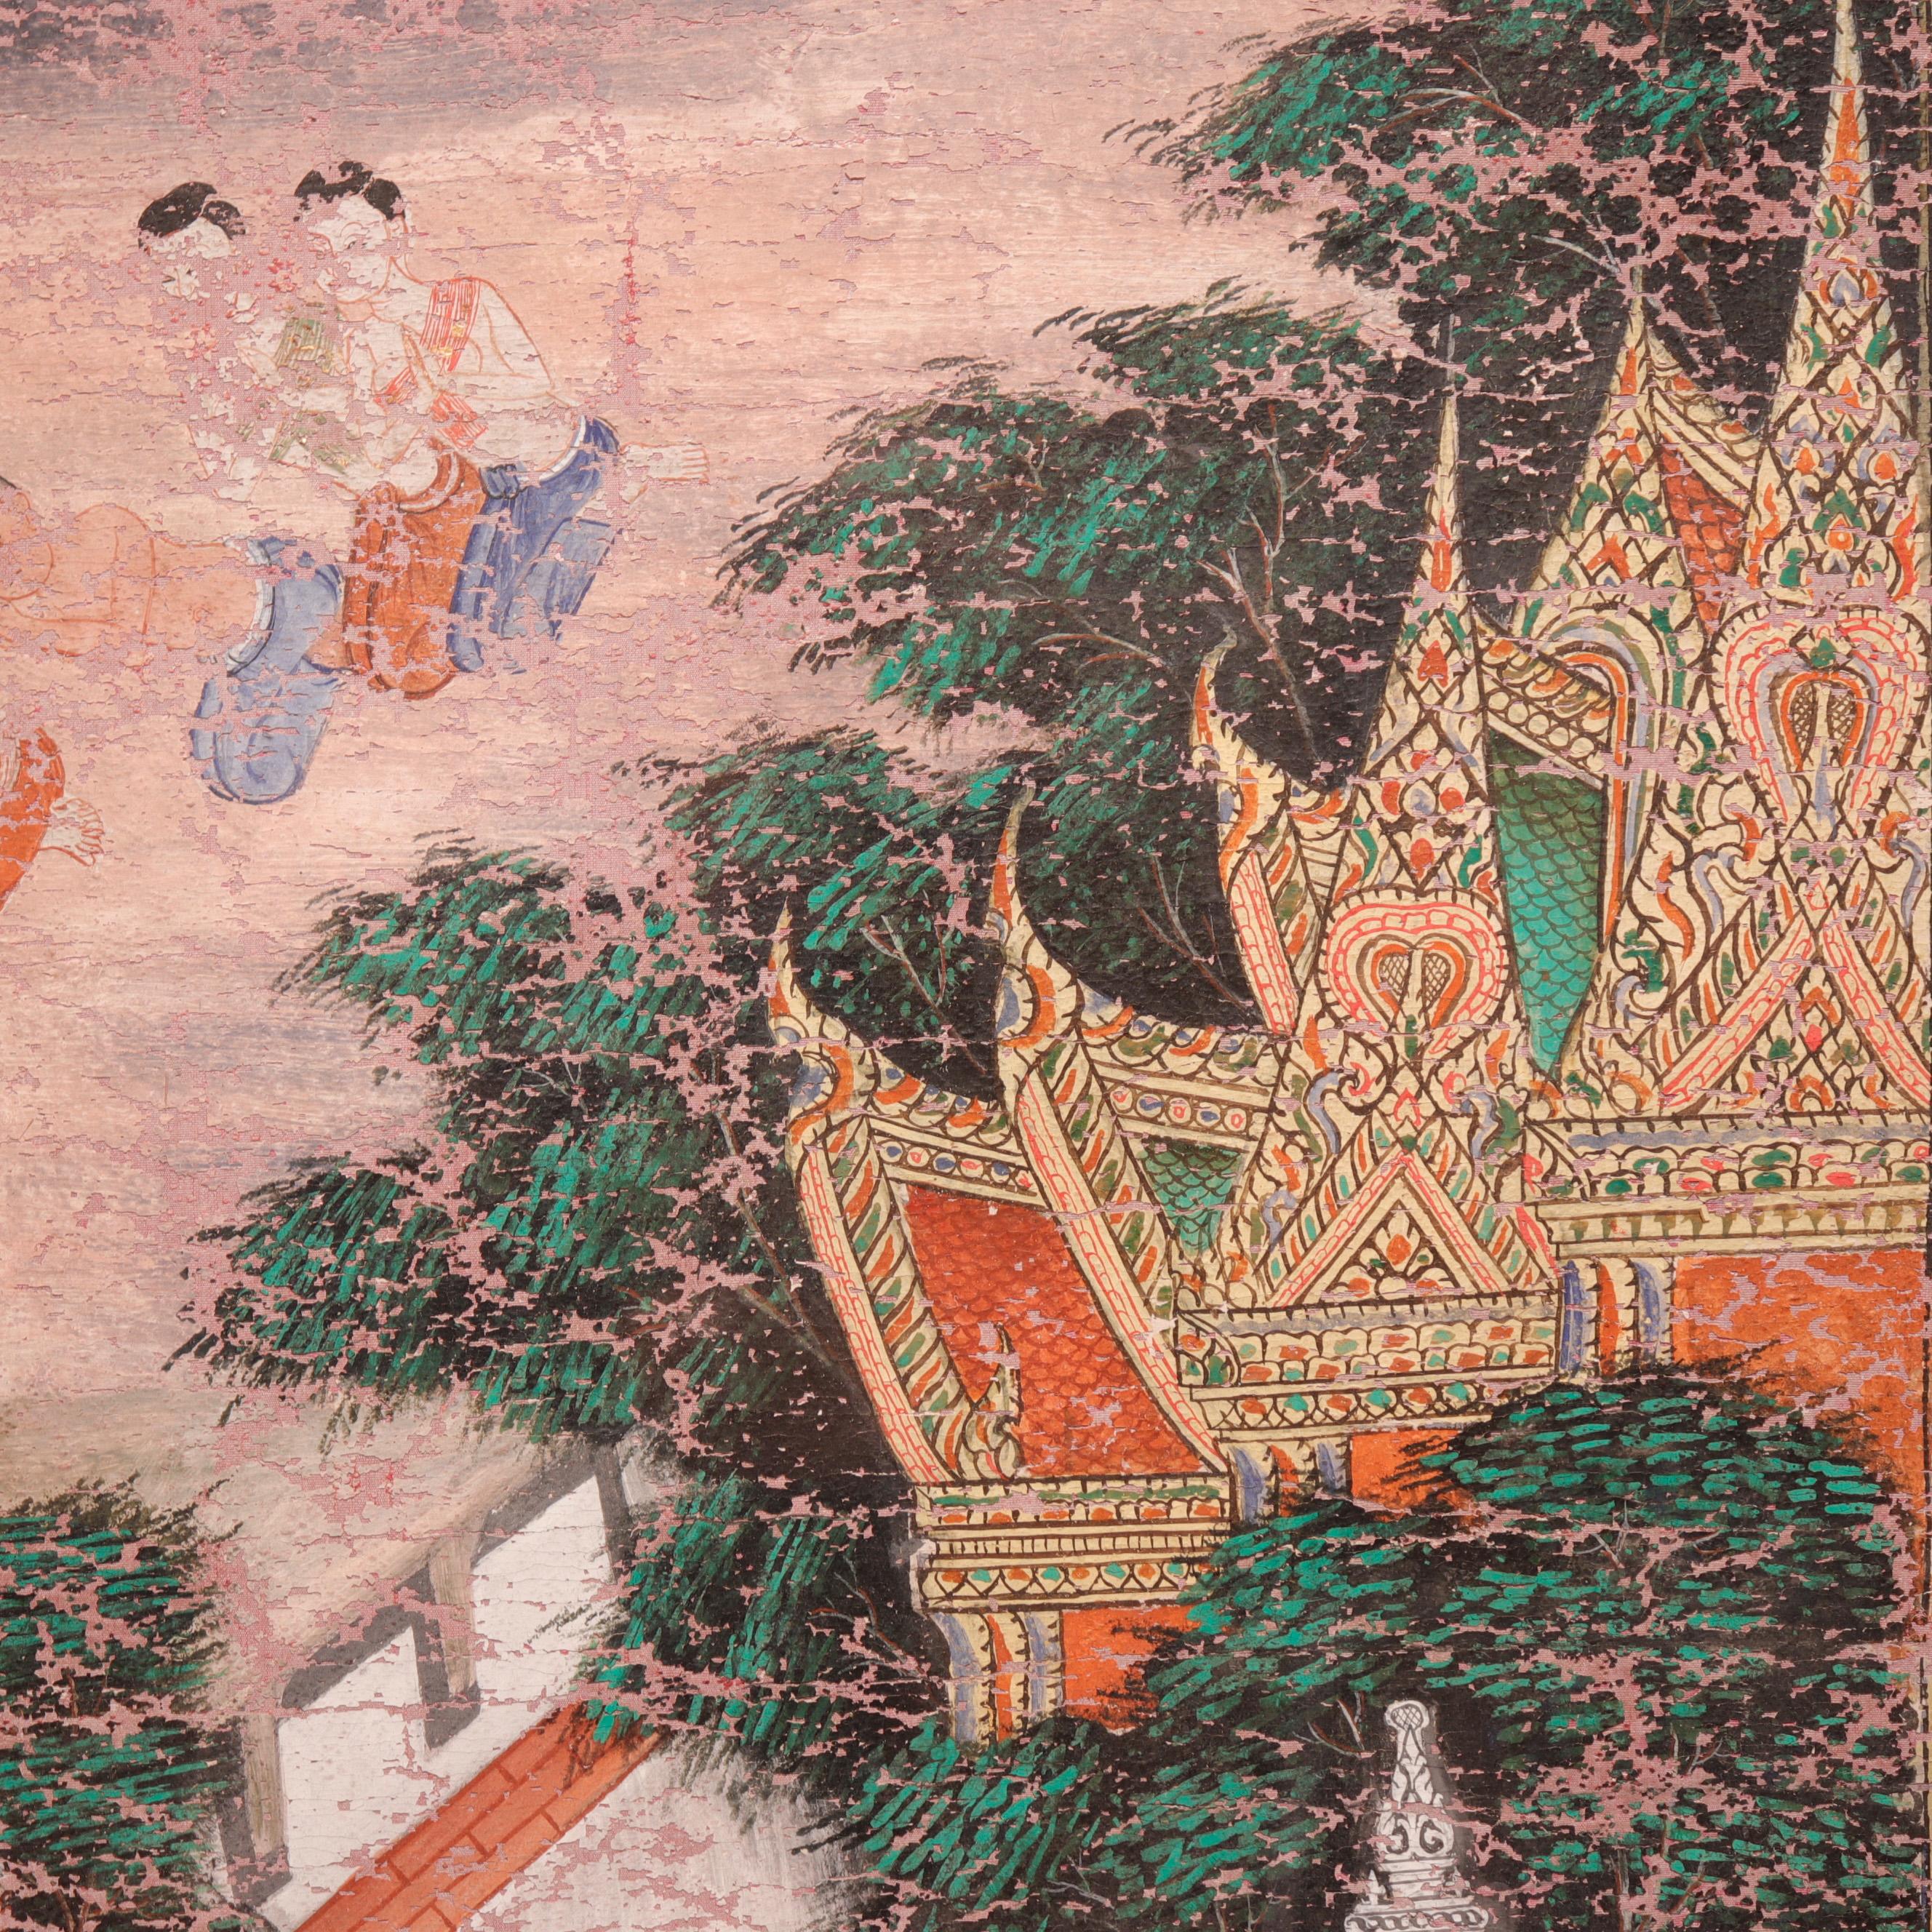 Antique Thai Buddhist banner painting, multicolored tempera and gold leaf on cloth, depicting Buddha Descending From Tavatimsa Heaven. An illustration of one of the eight great events of the historical Buddha’s life, his descent from the heaven of